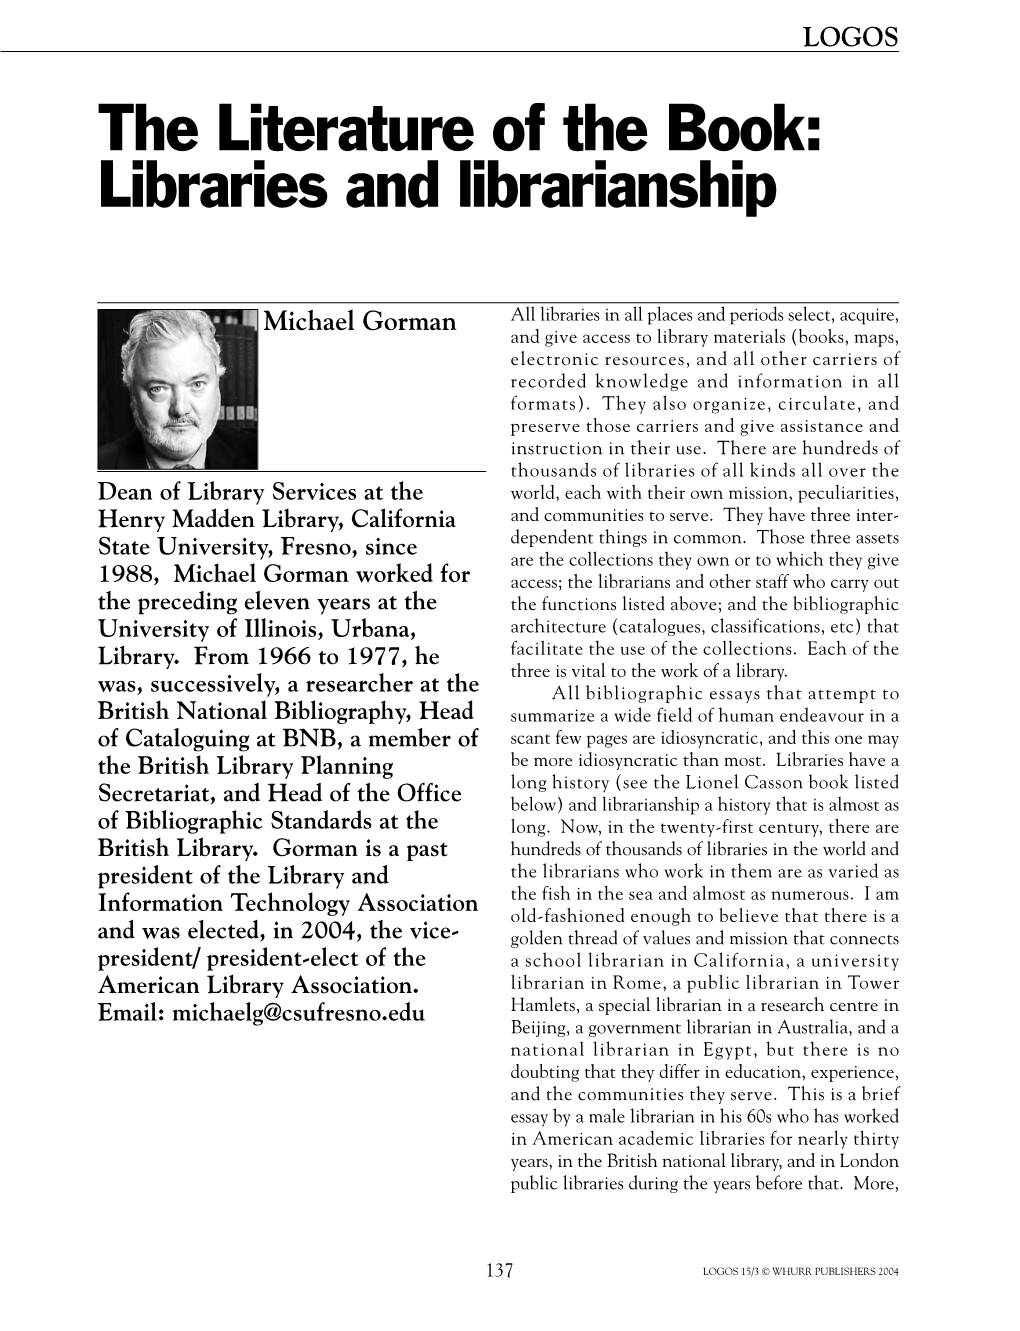 The Literature of the Book: Libraries and Librarianship